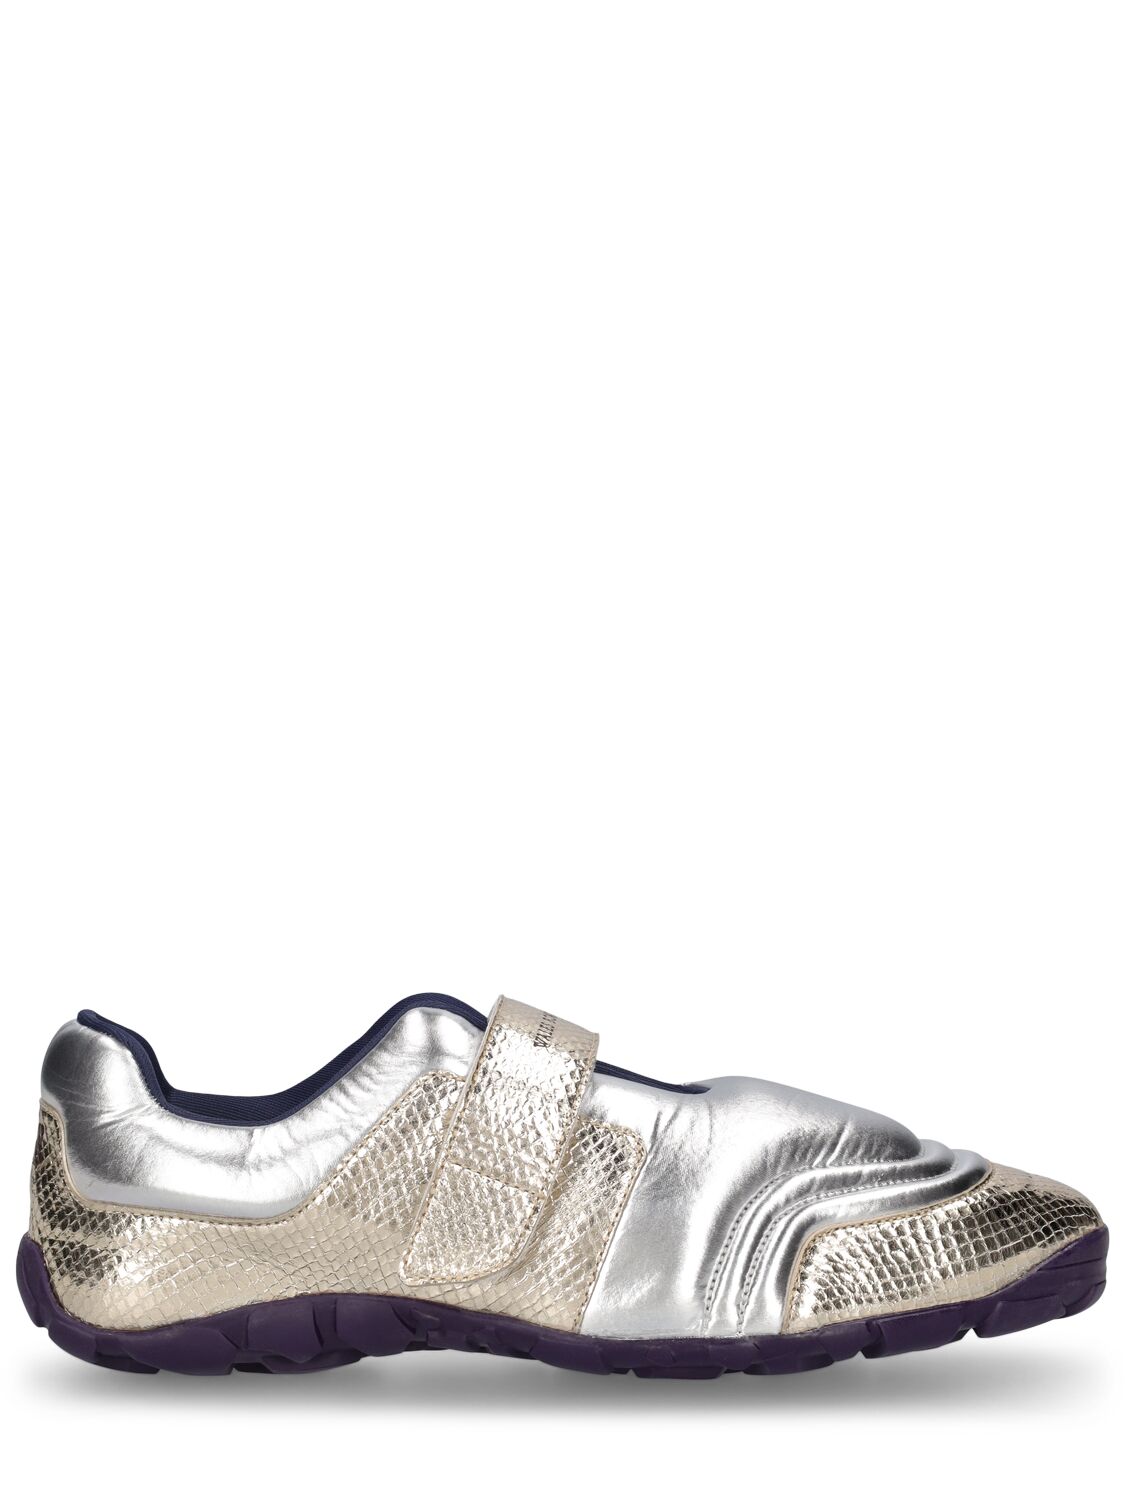 Wales Bonner Printed Croco Metallic Leather Trainers In Gold